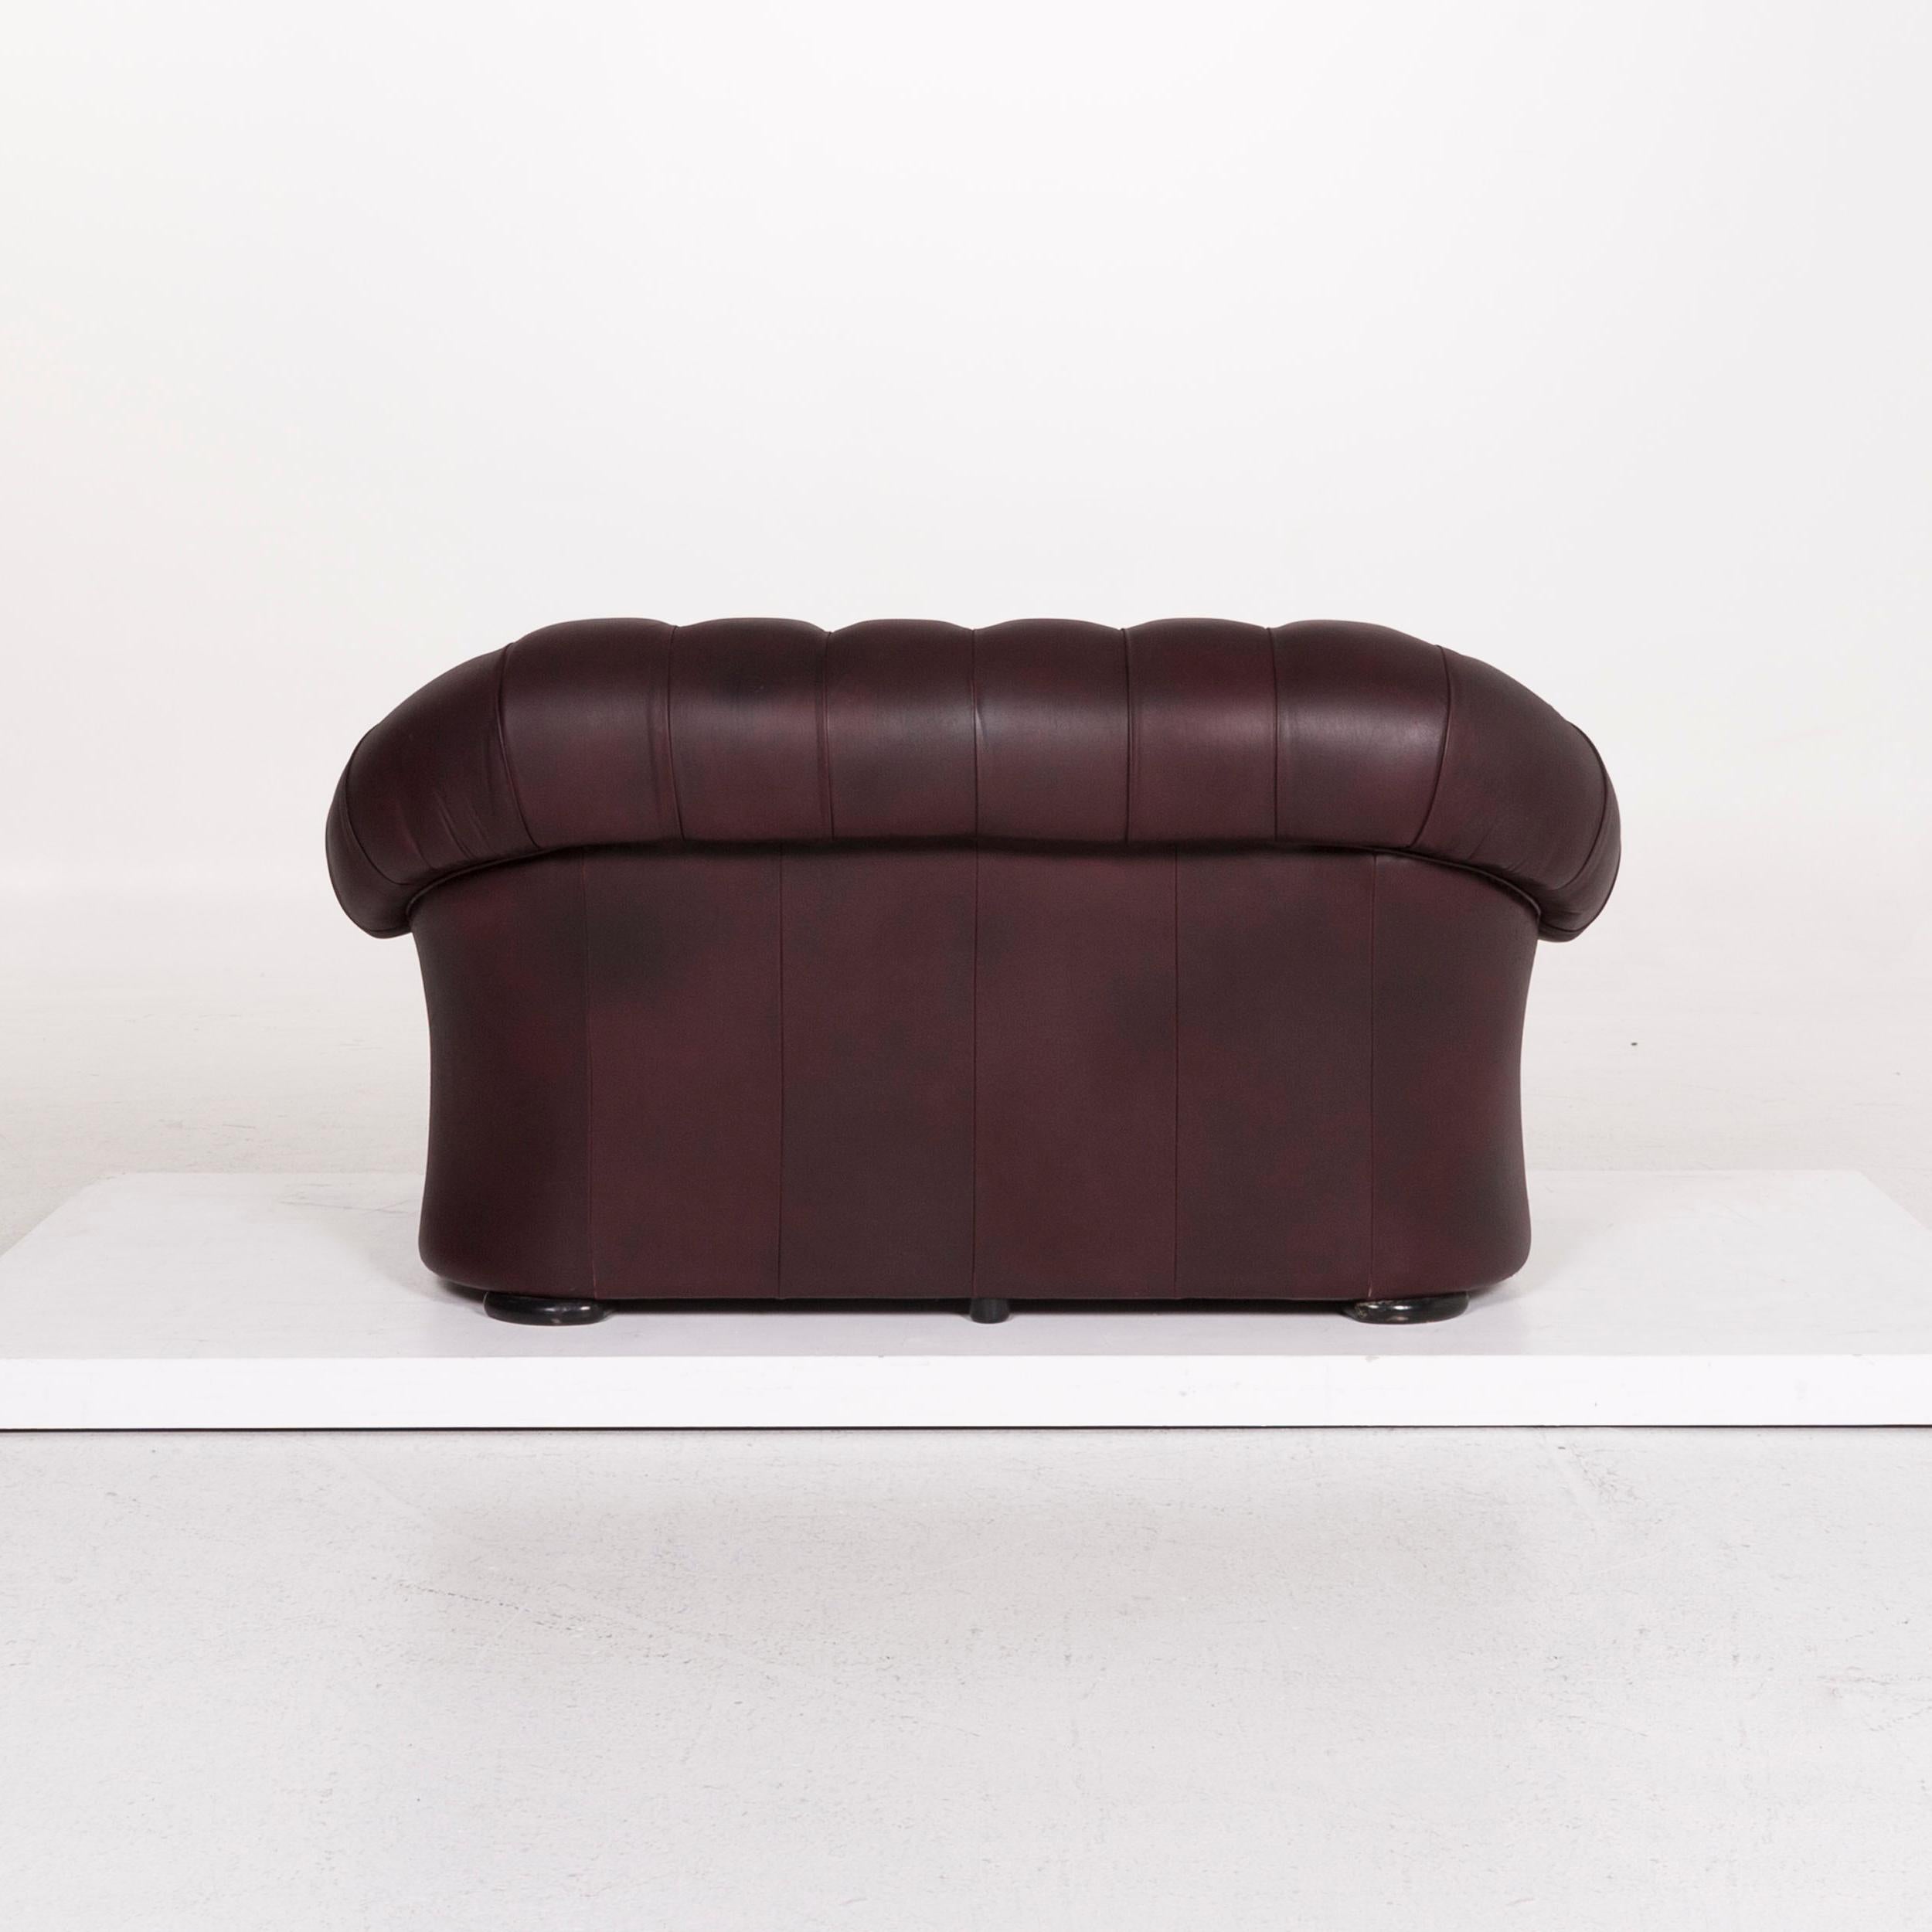 Modern Chesterfield Leather Sofa Brown Purple Two-Seat Retro Couch